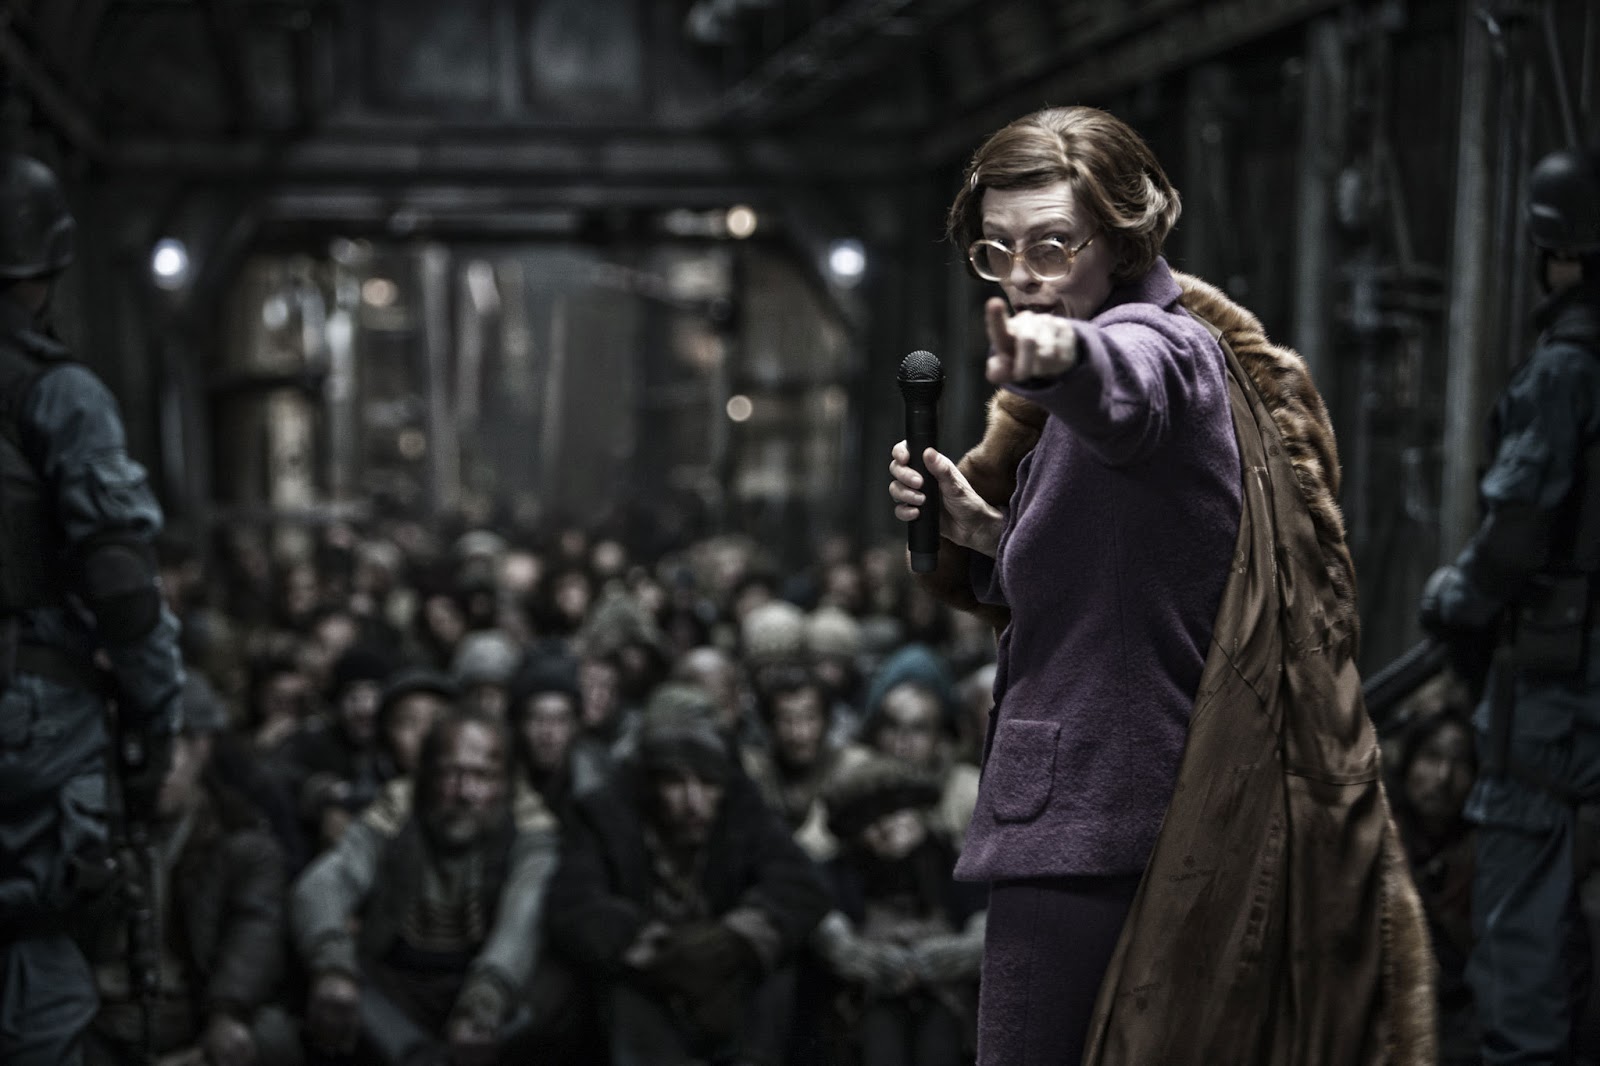 MOVIE REVIEWS IN BRIEF: ‘Snowpiercer’! (And Some Others)